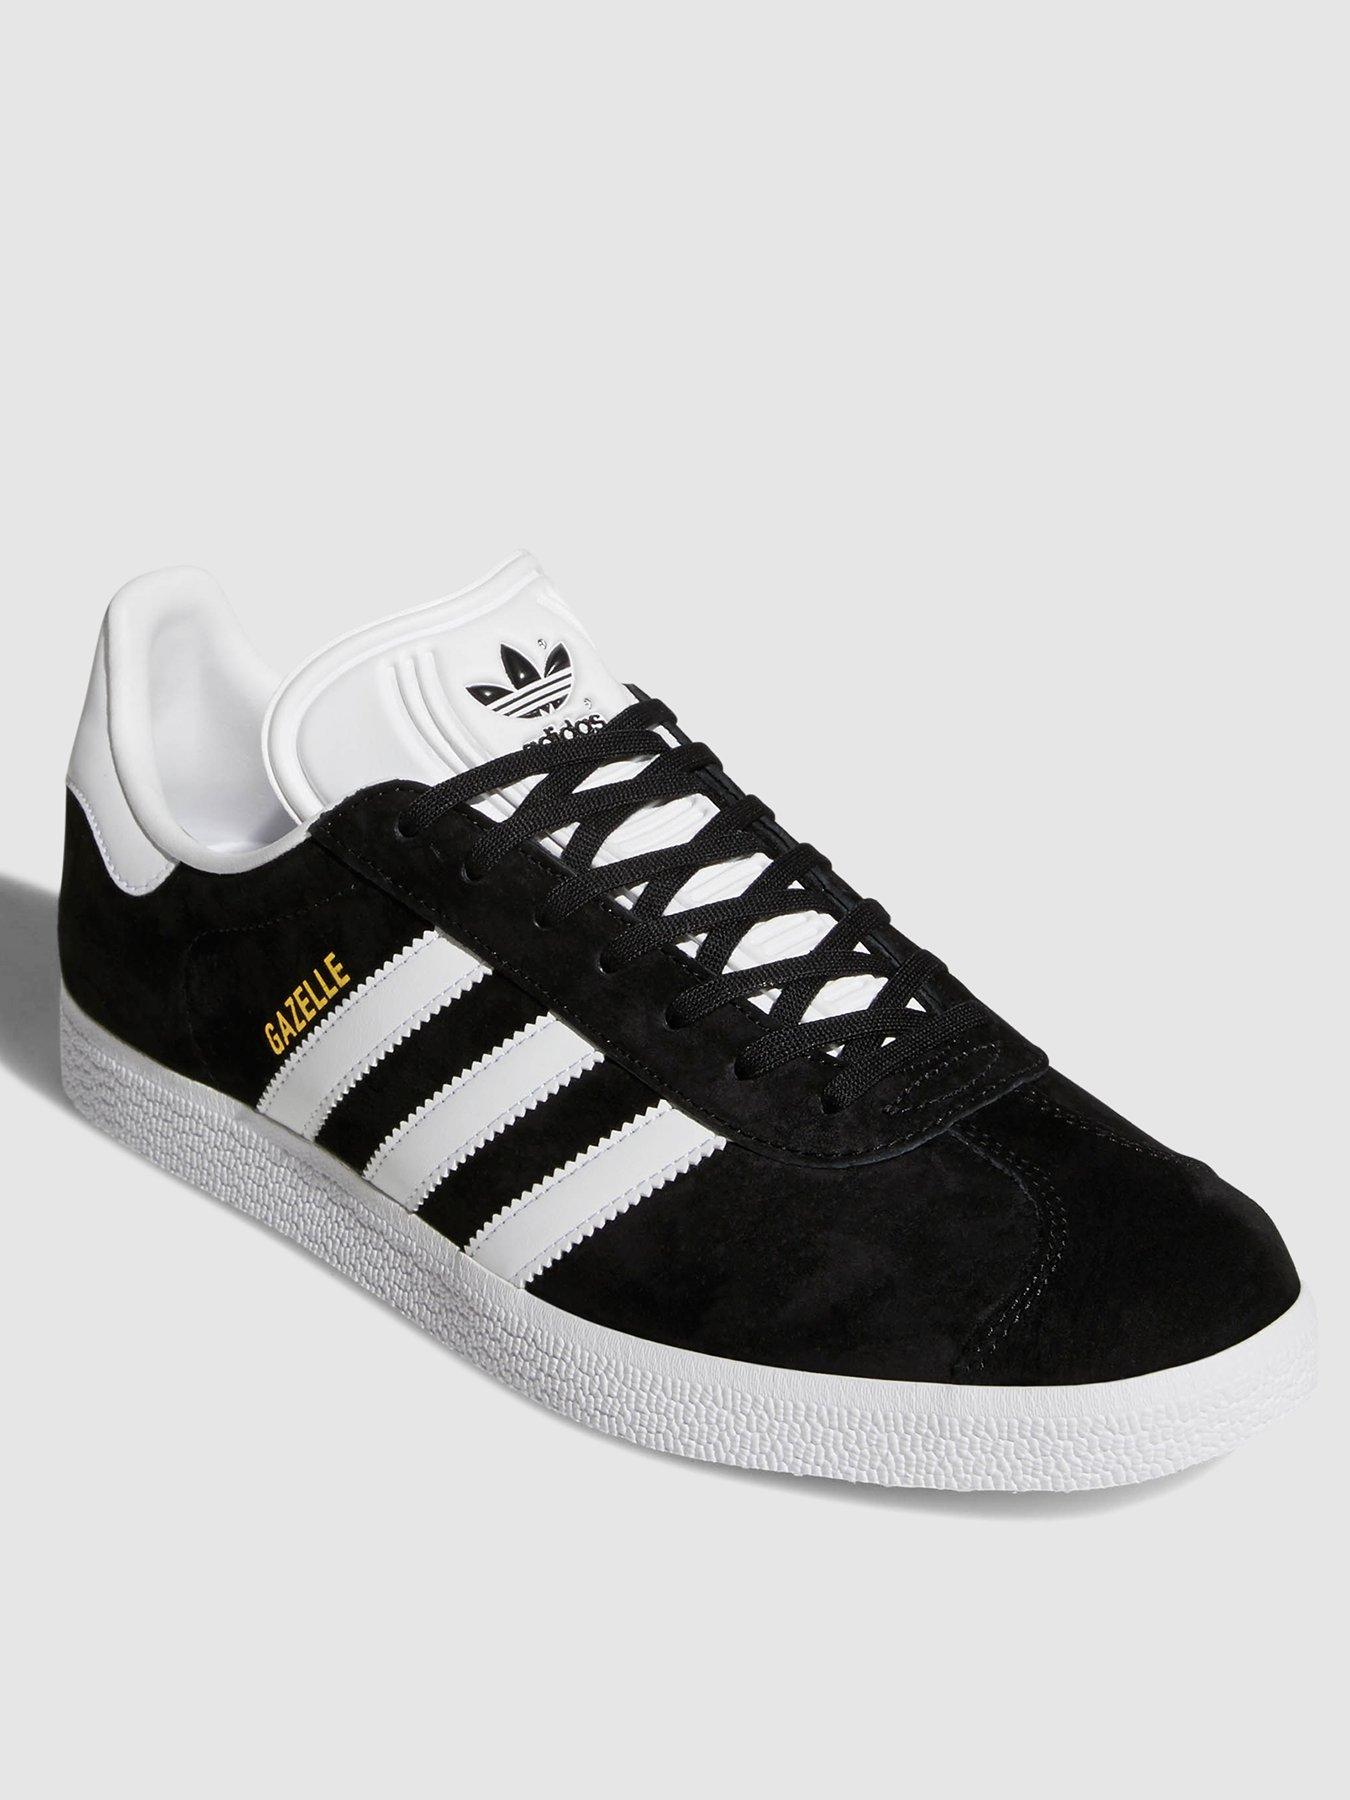 Shop Mens Trainers | Very.co.uk